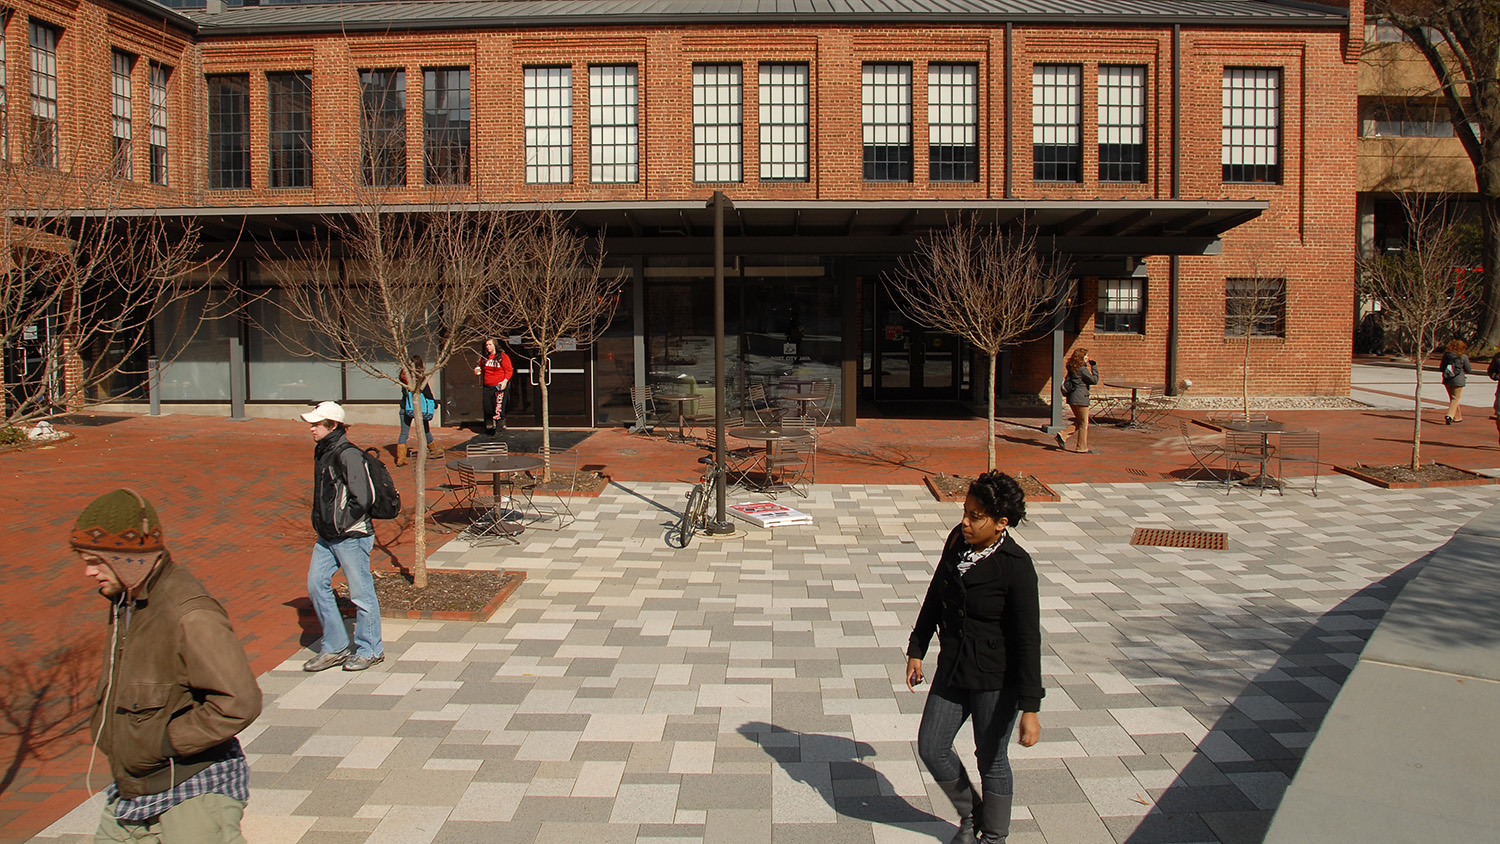 Students walk past Park Shops on a cold Winter day